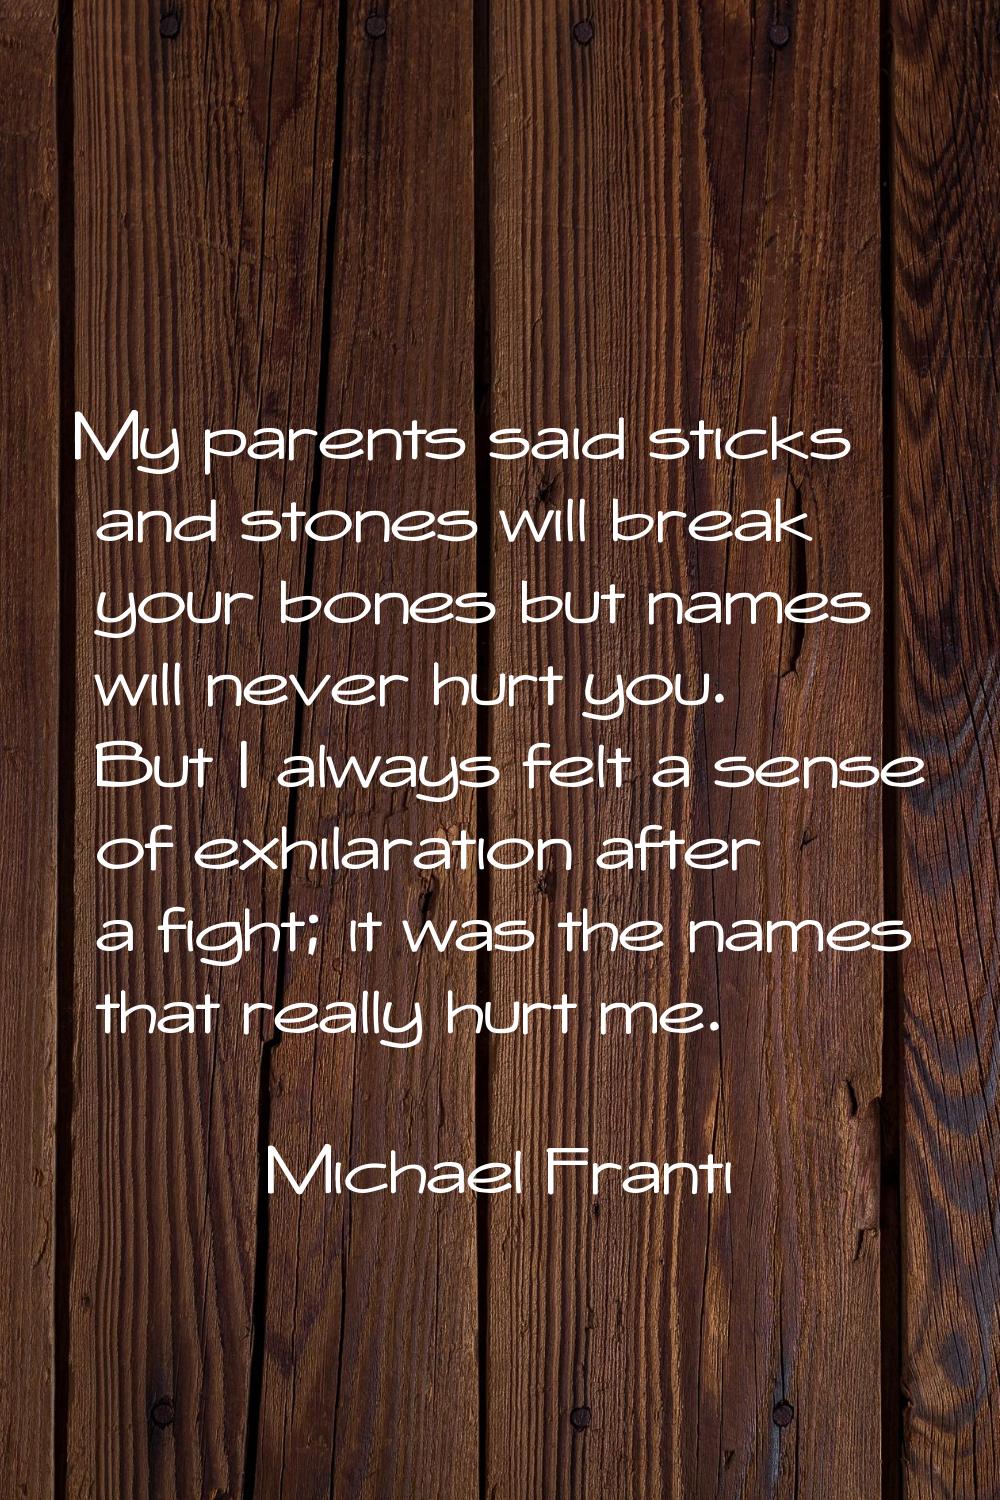 My parents said sticks and stones will break your bones but names will never hurt you. But I always